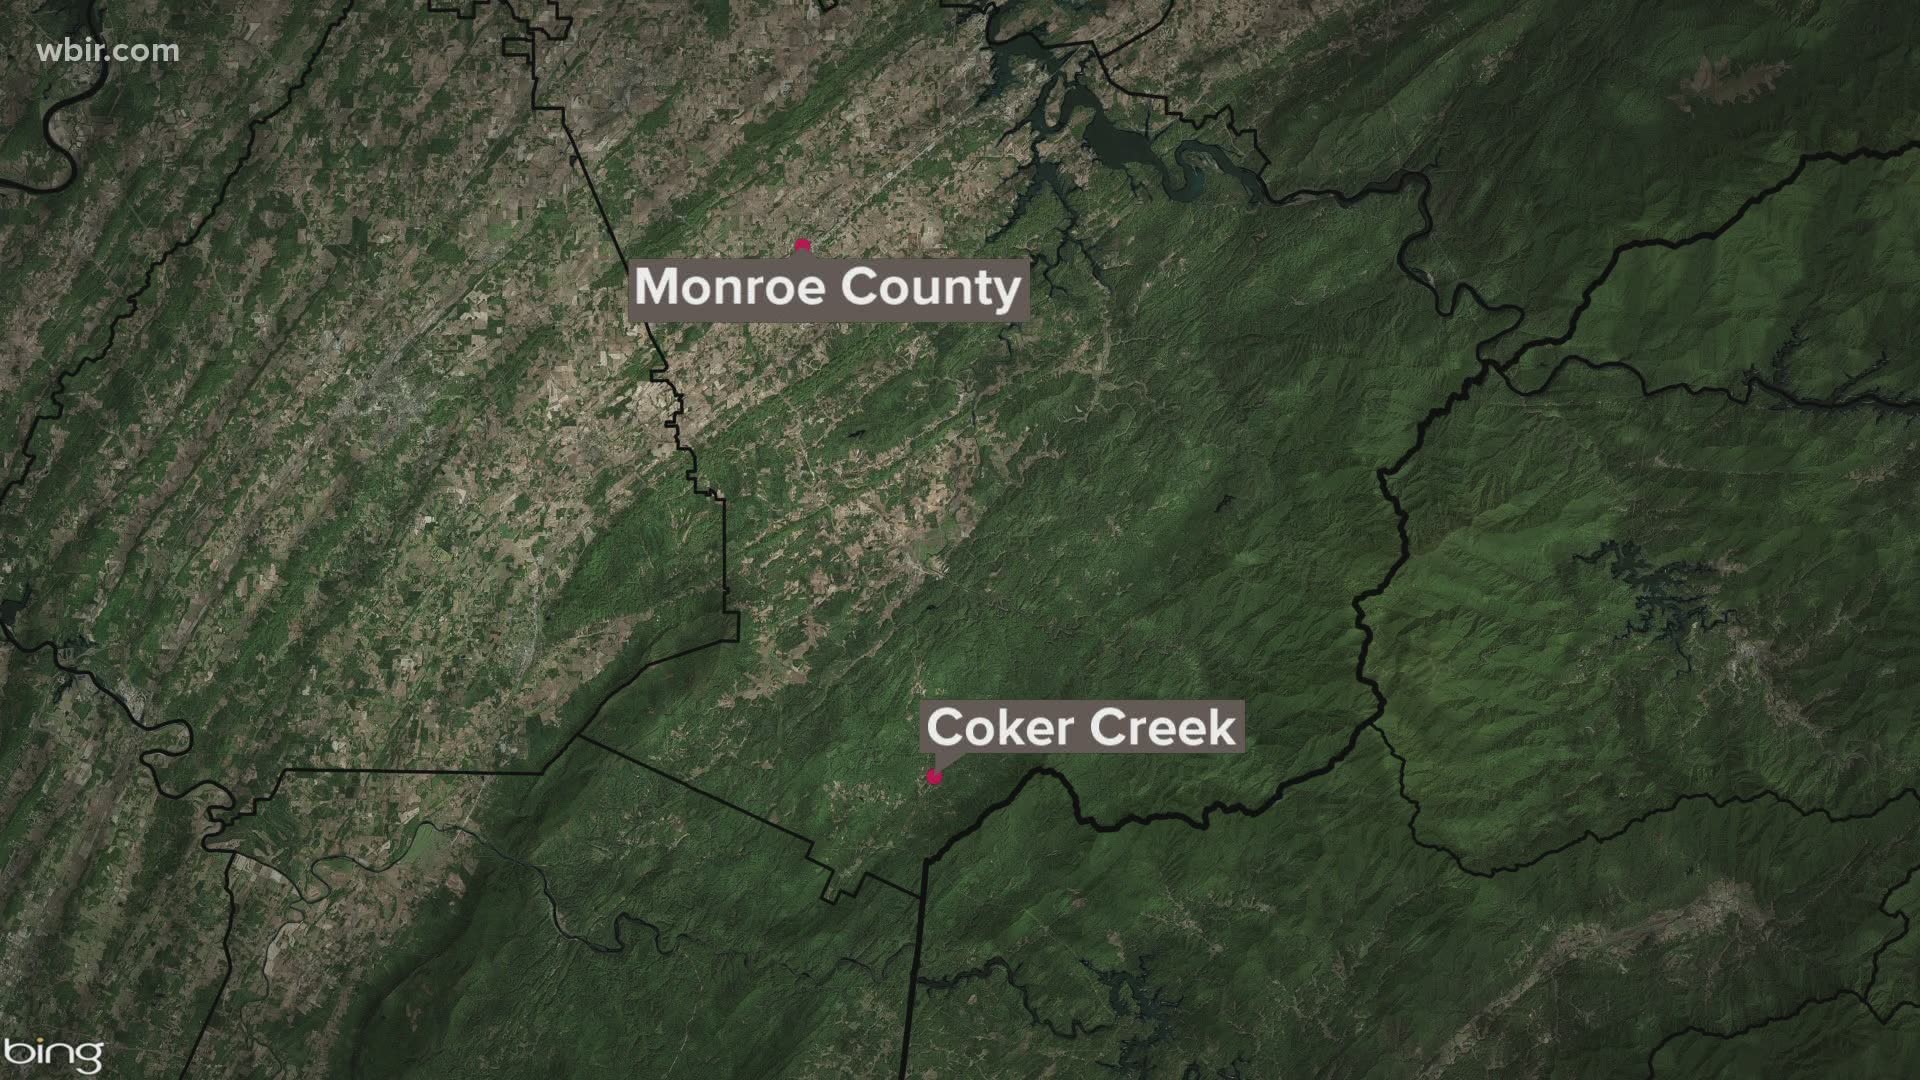 The sheriff's office says it happened Saturday night in Coker Creek.